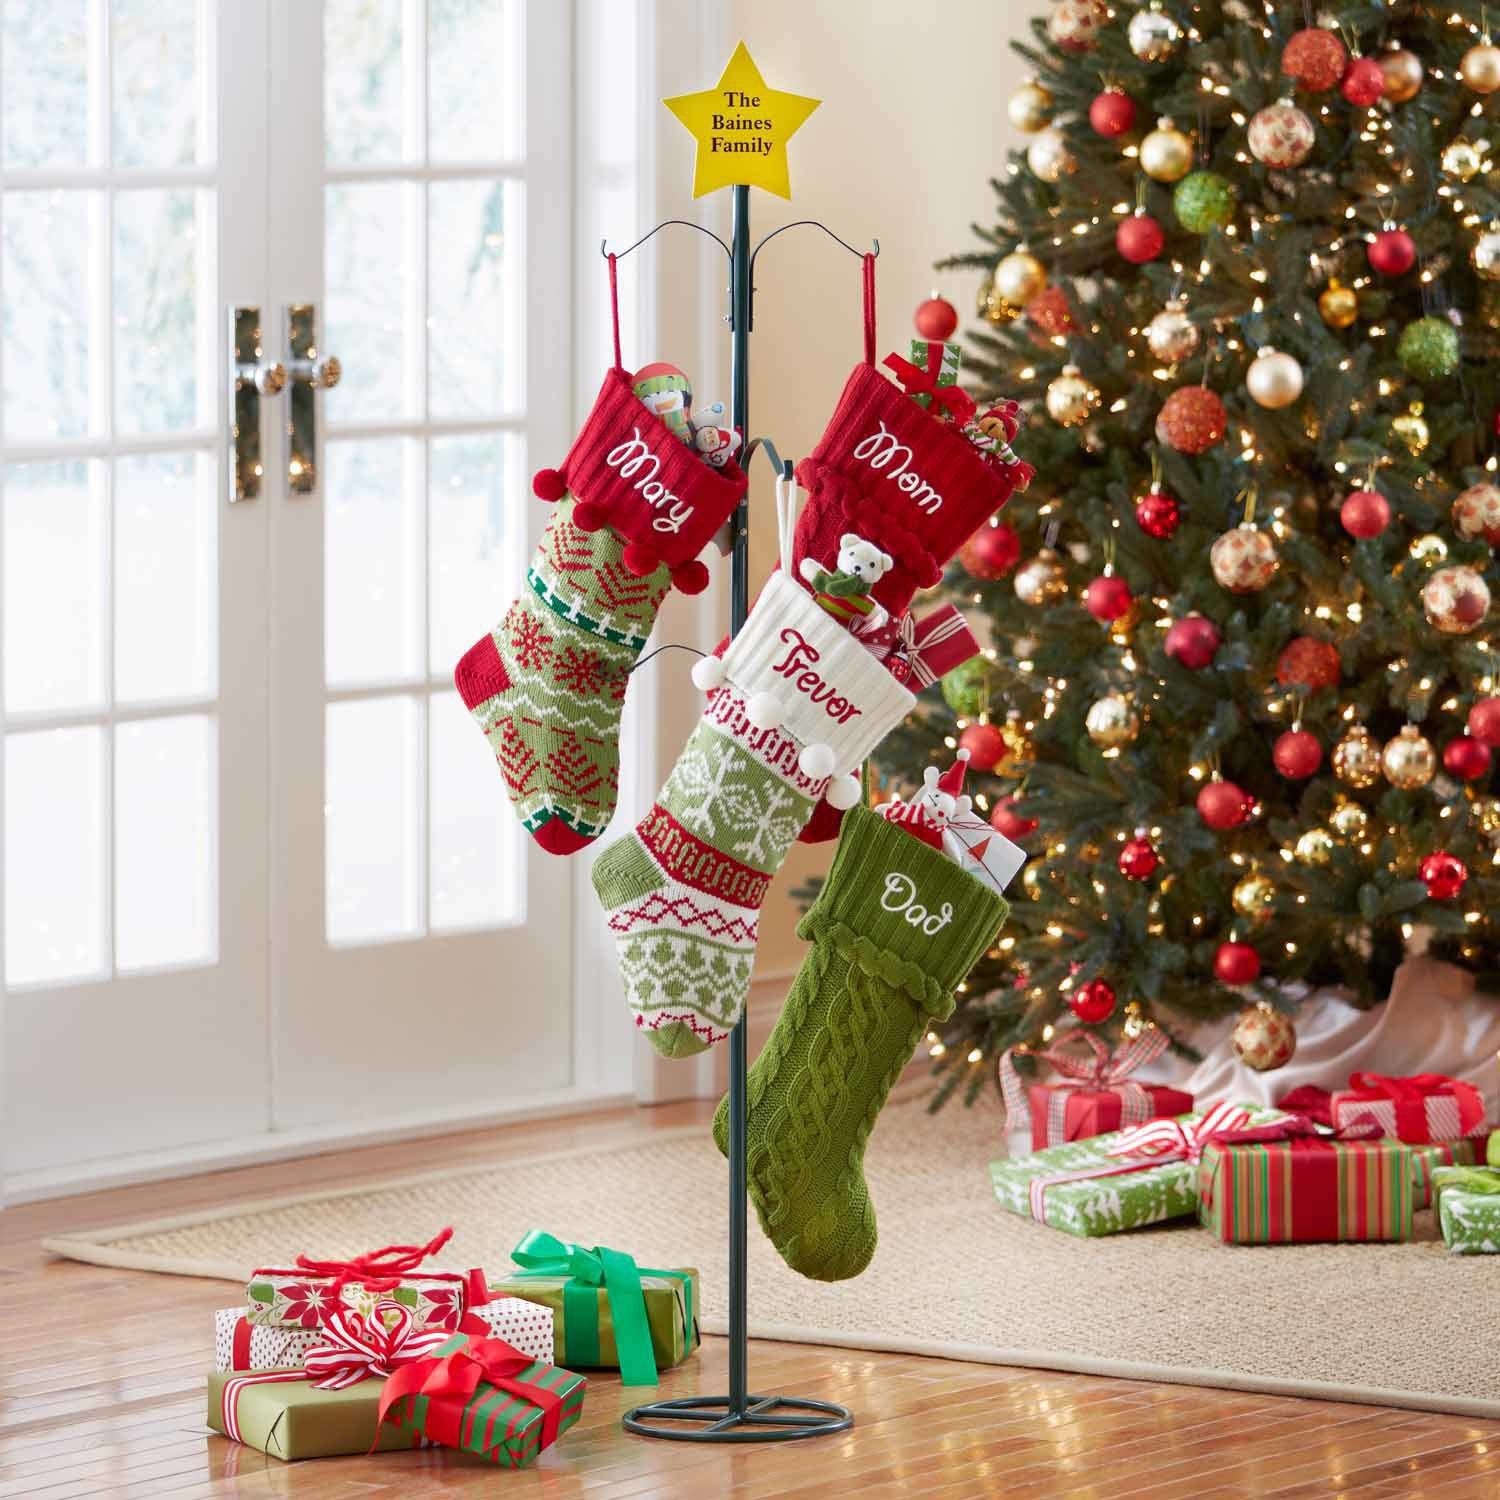 The stocking holder with a personalized star at the top holding four stockings